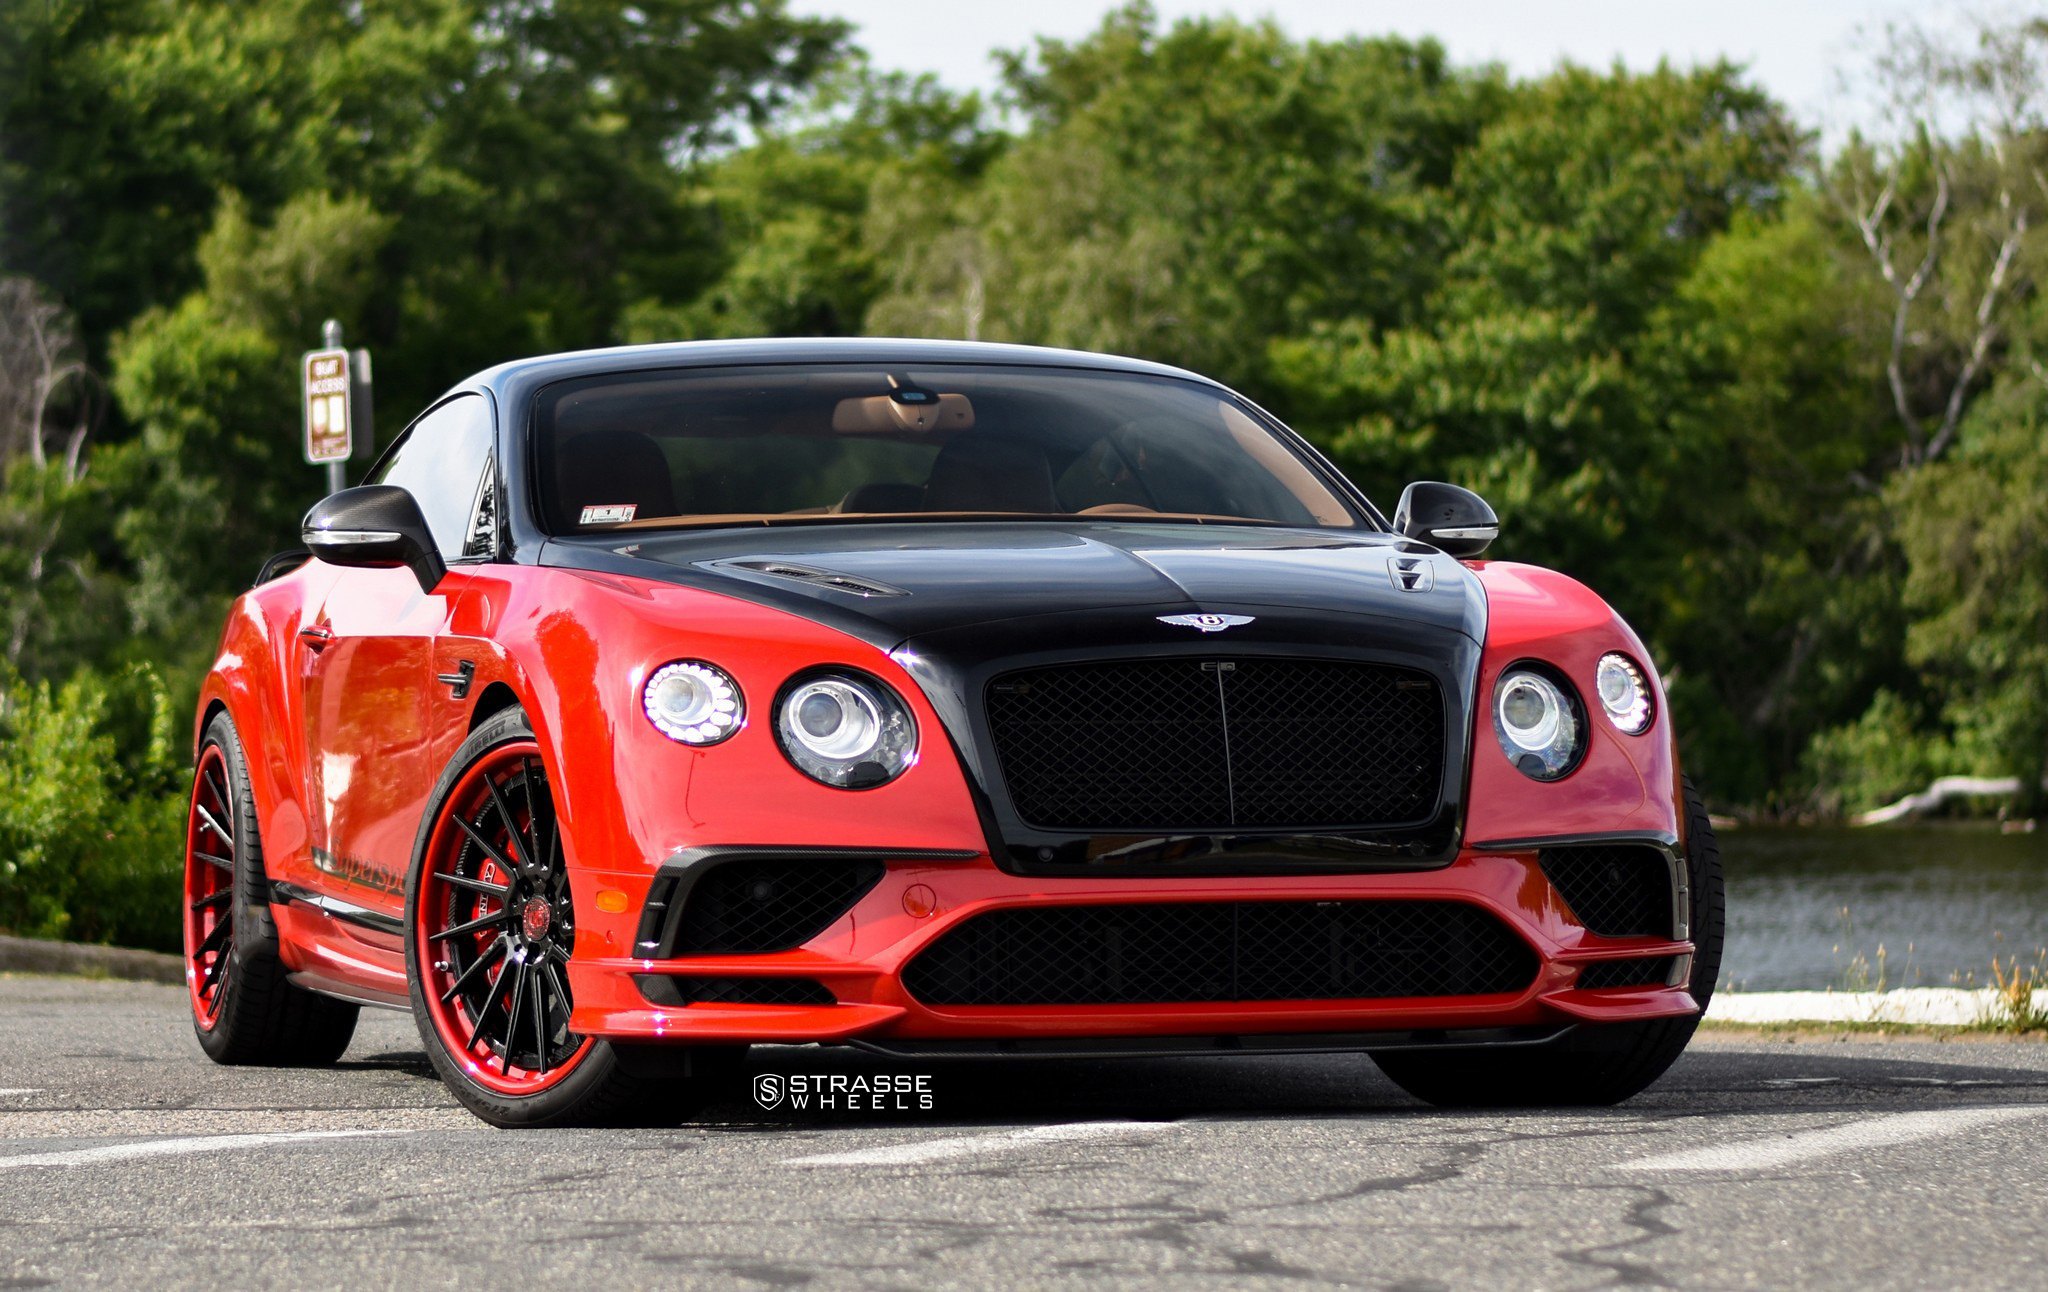 Blacked Out Mesh Grille on Red Bentley Continental - Photo by Strasse Wheels